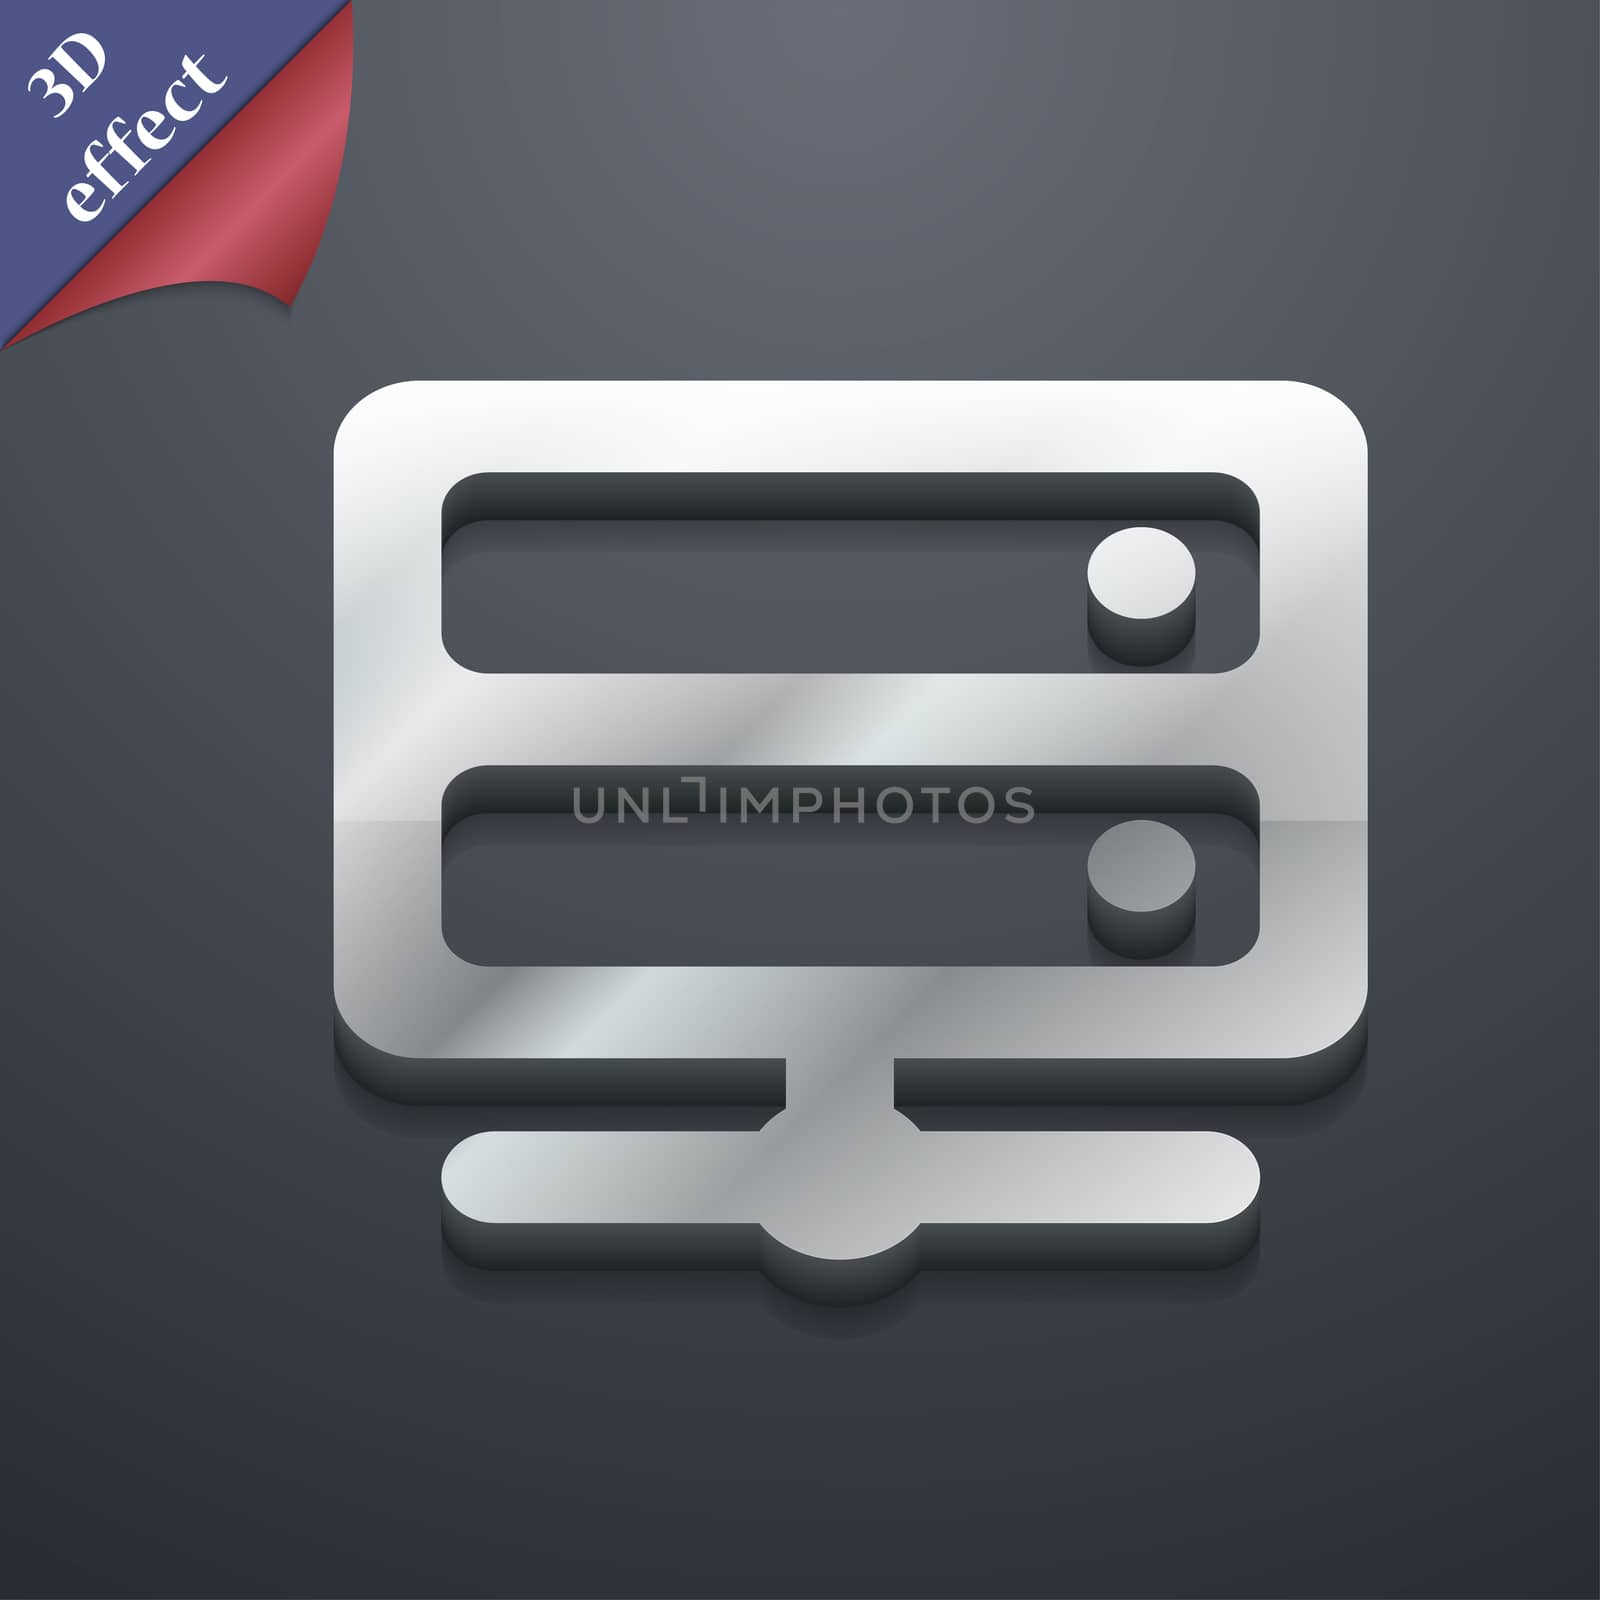 Server icon symbol. 3D style. Trendy, modern design with space for your text illustration. Rastrized copy